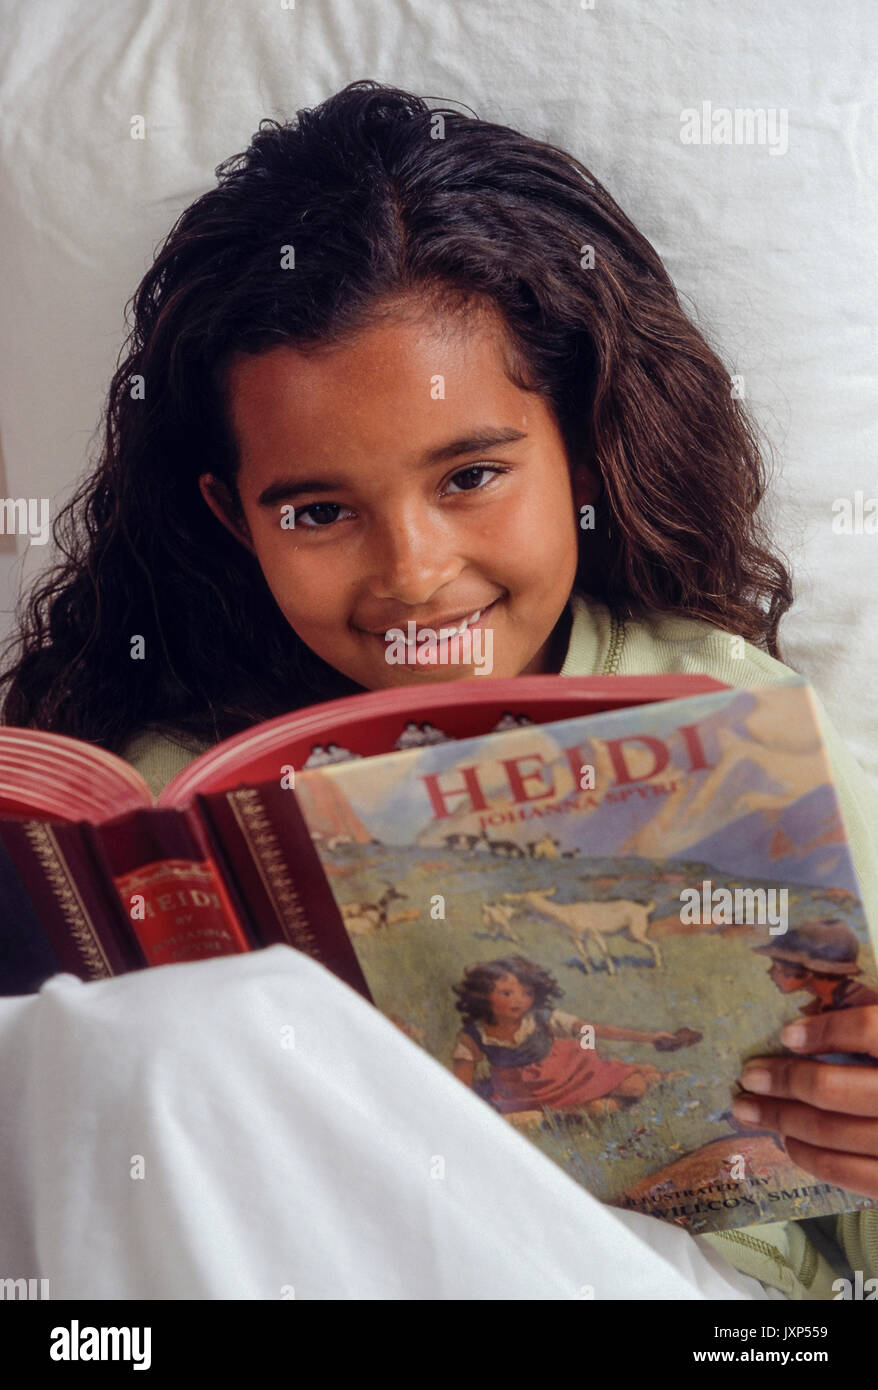 Little girl 7-9 years old with sincere expression reading classic storybook 'Heidi'  in bed looks up open welcoming smile. African American/Caucasian Stock Photo